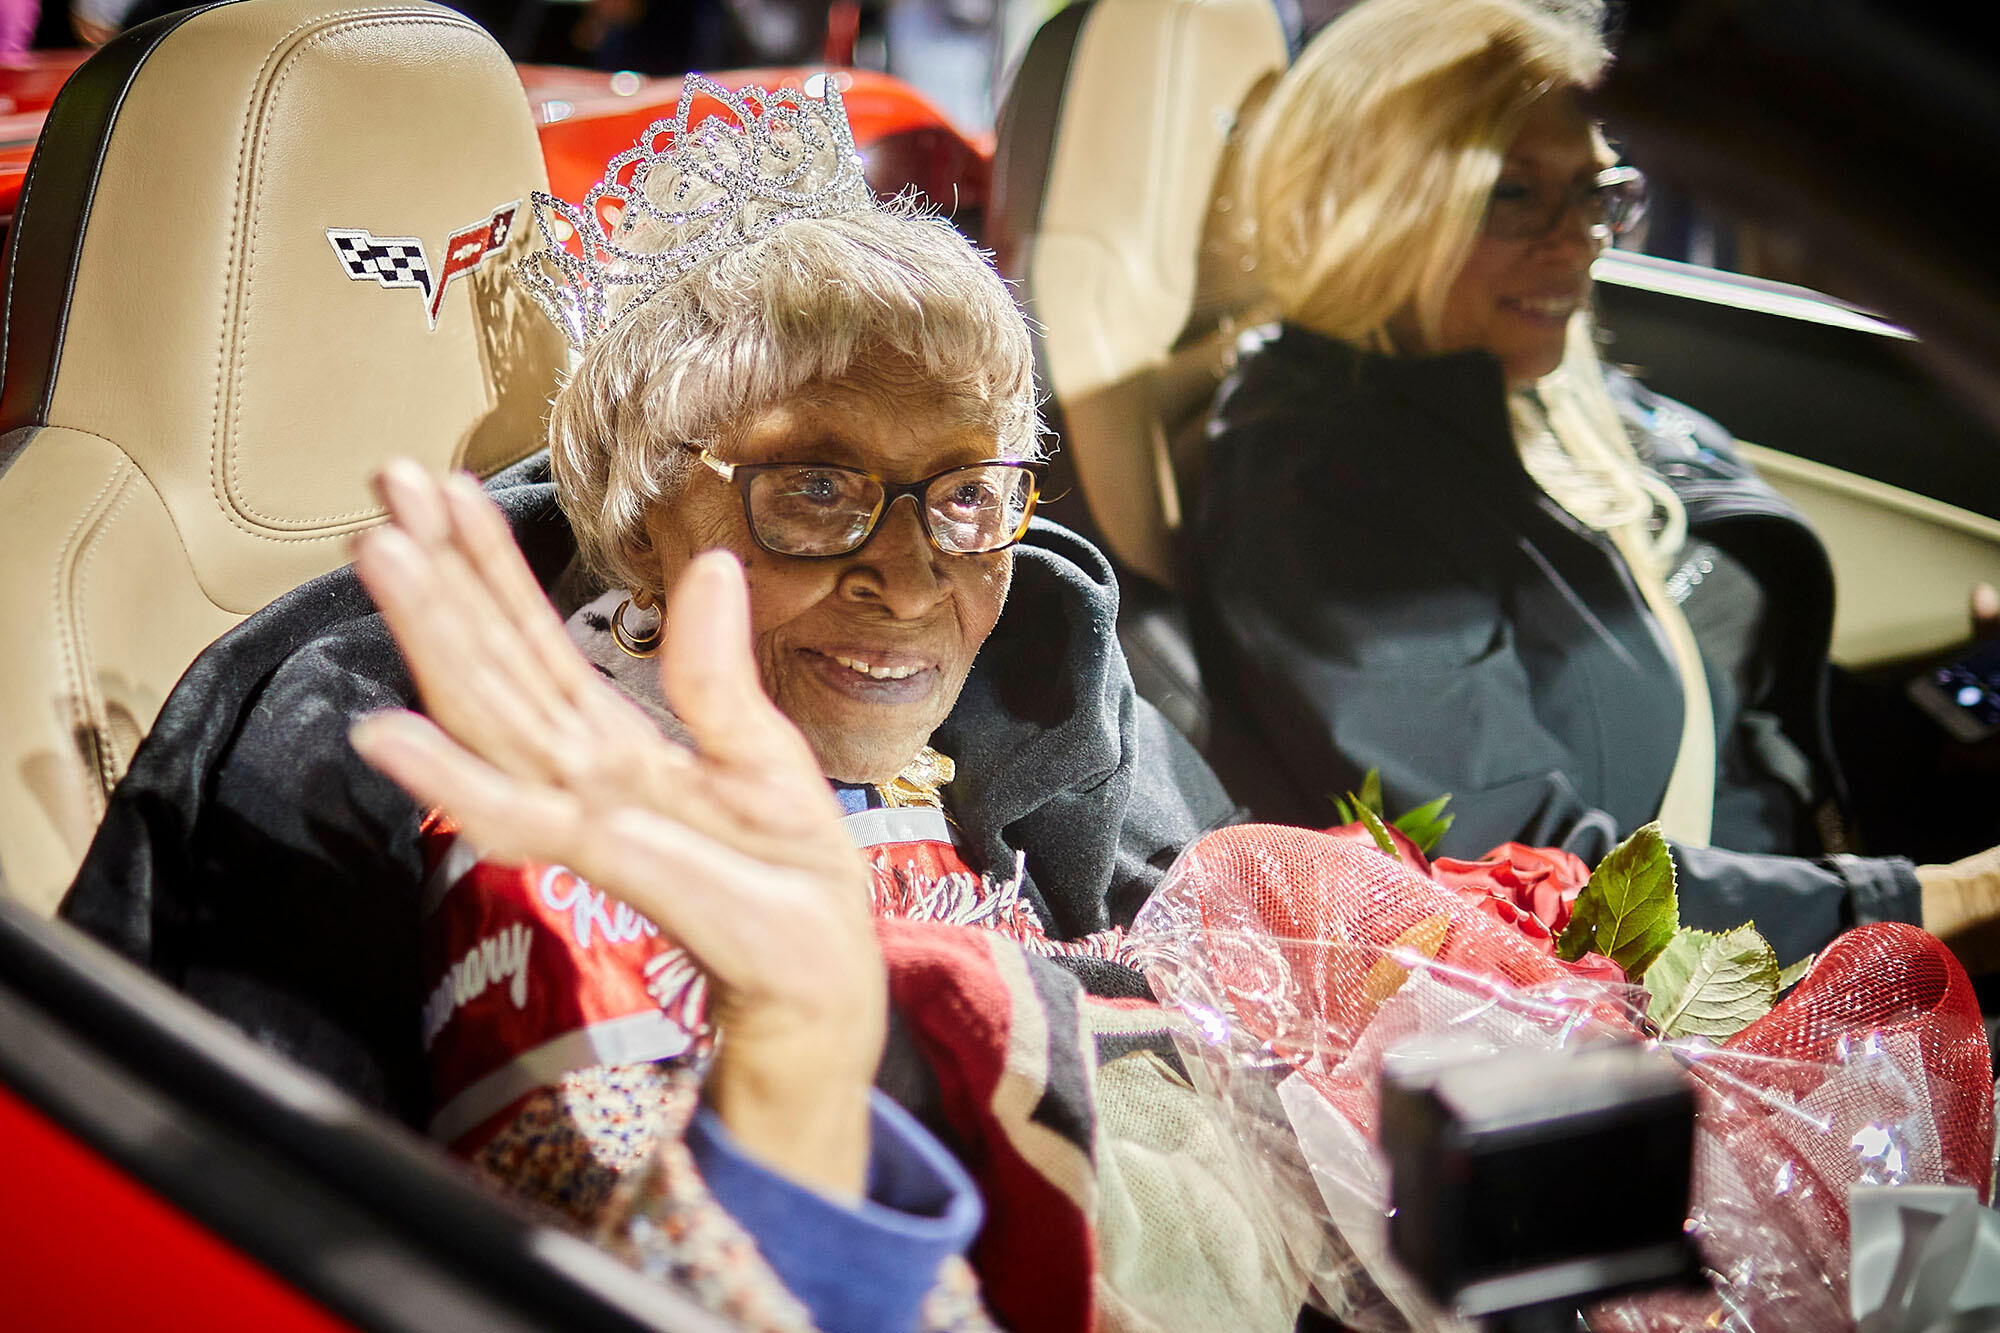 In 2019, UNLV’s eldest living alumna Audrey James (’65, ’71) was crowned honorary homecoming queen at 105 years of age and presided over the Scarlet and Gray parade.